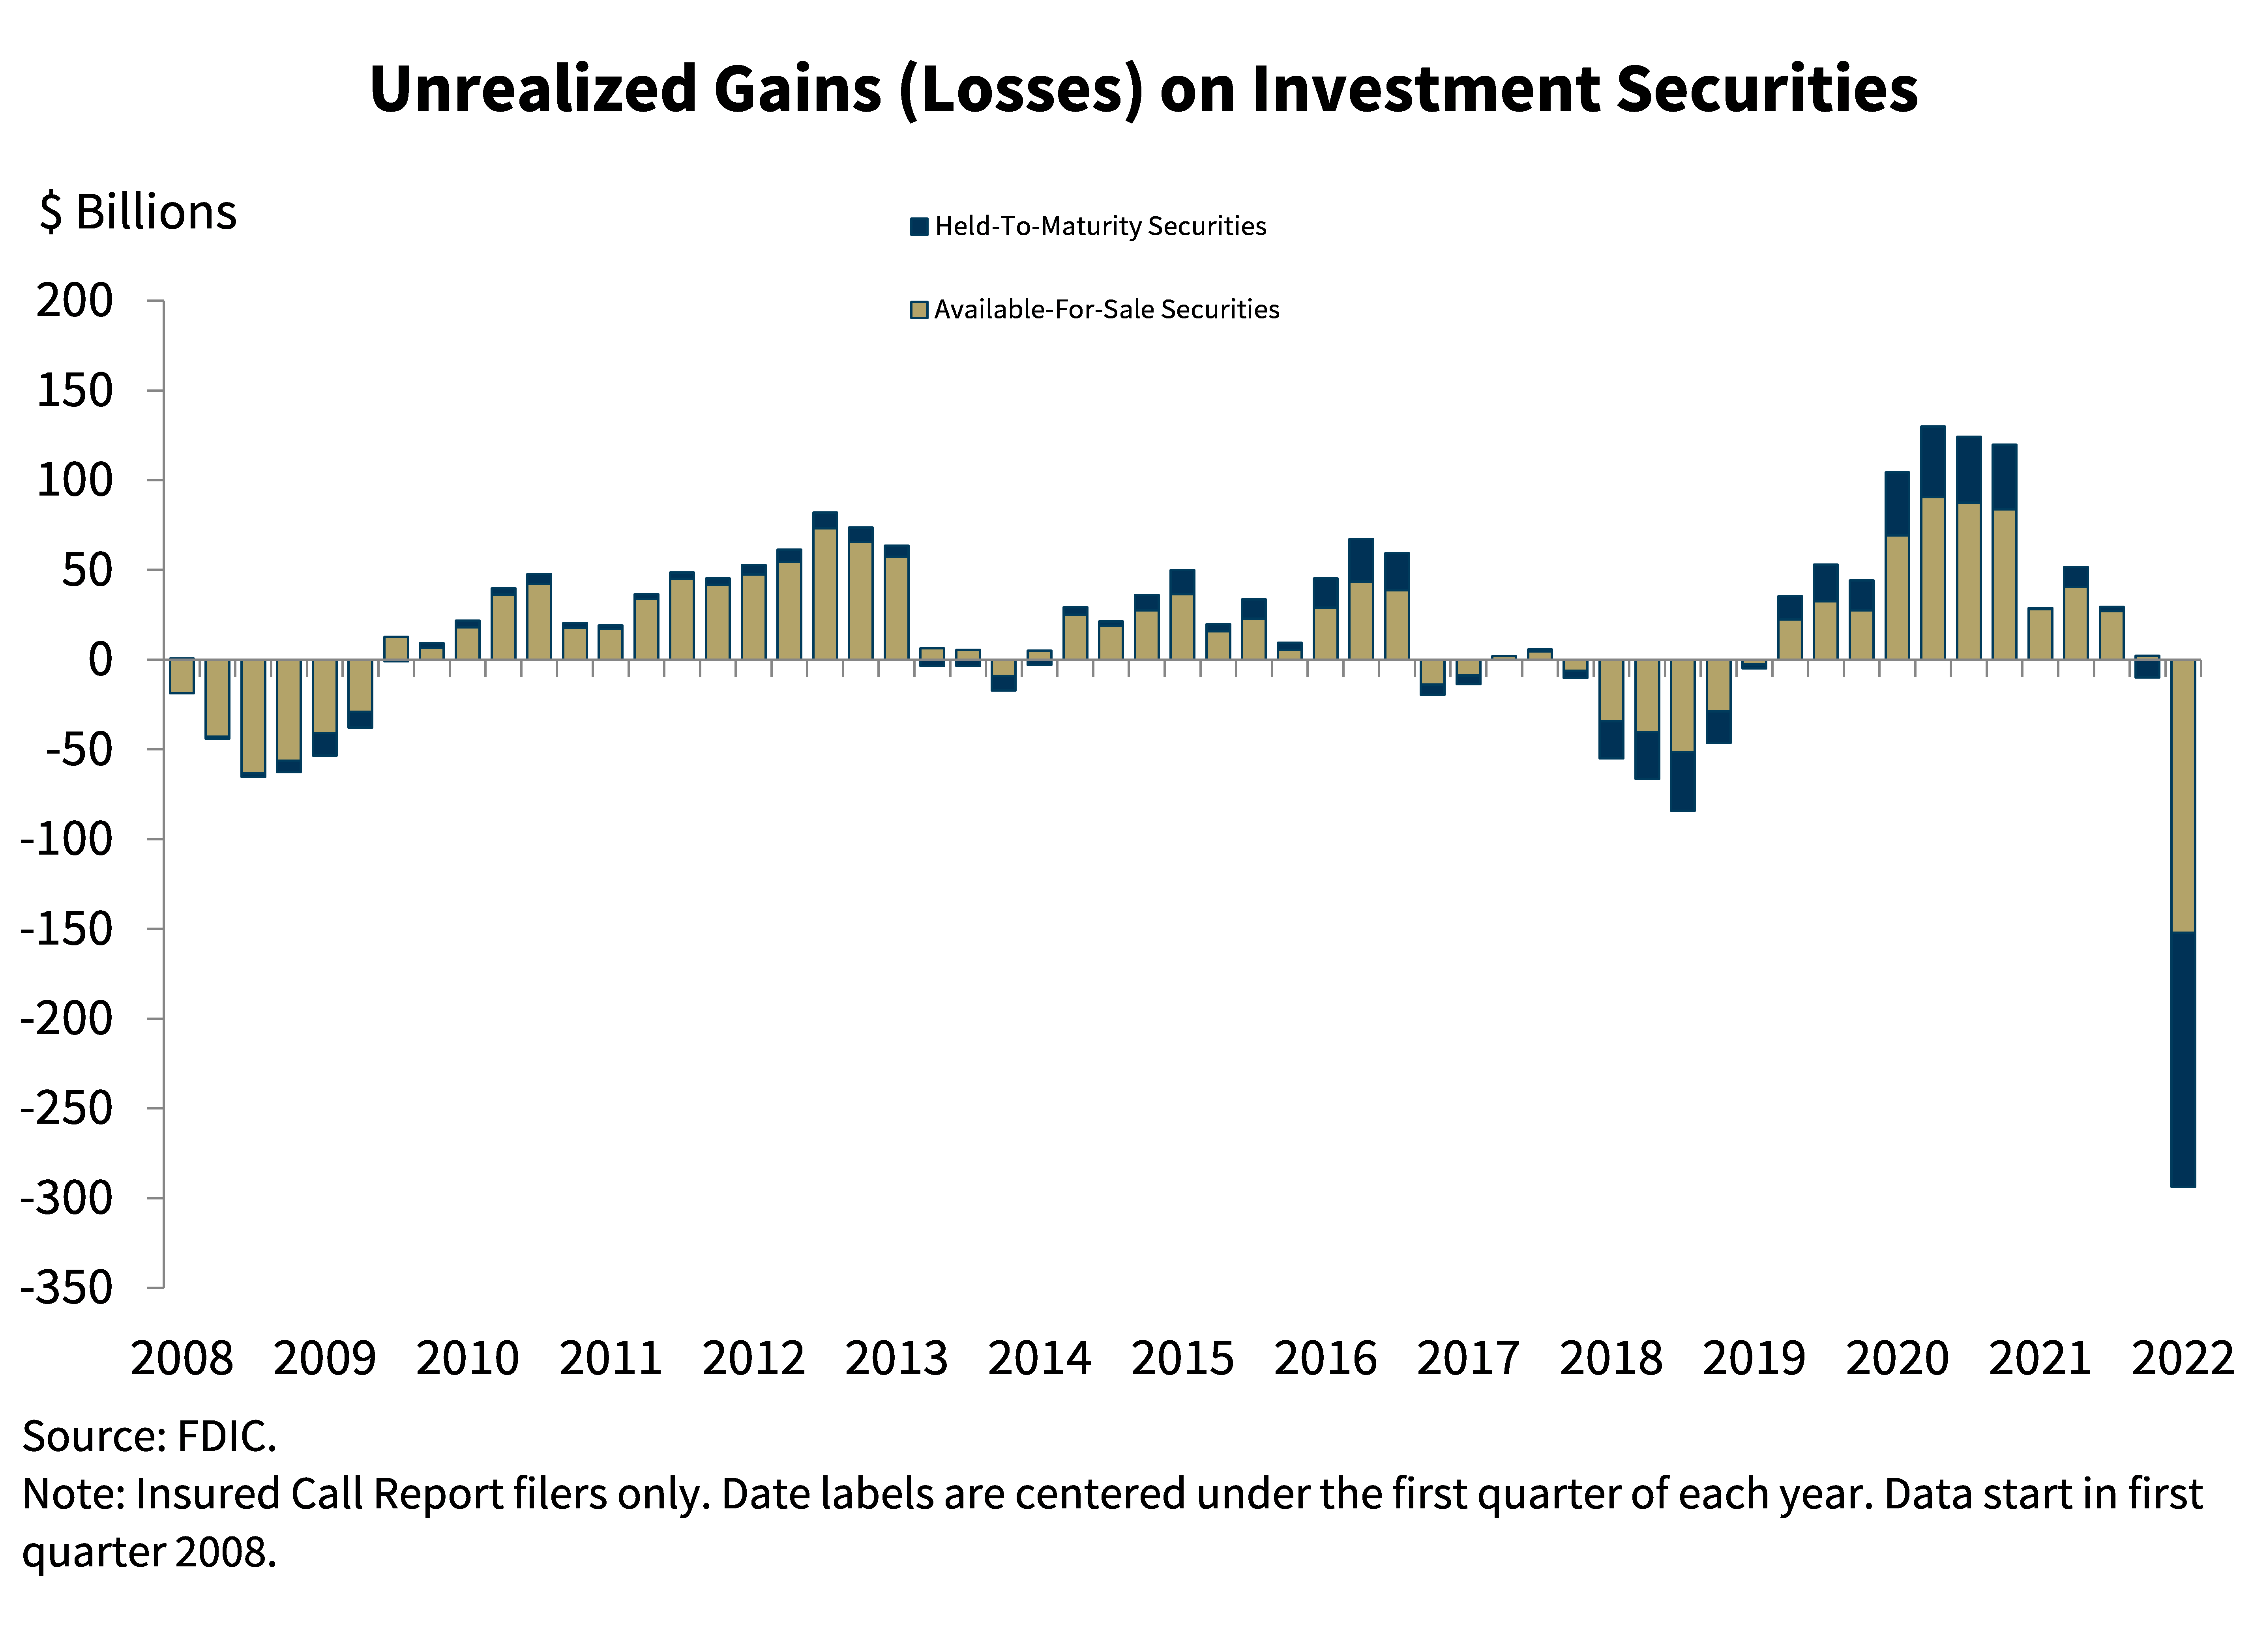 Chart 5: Unrealized Gains (Losses) on Investment Securities